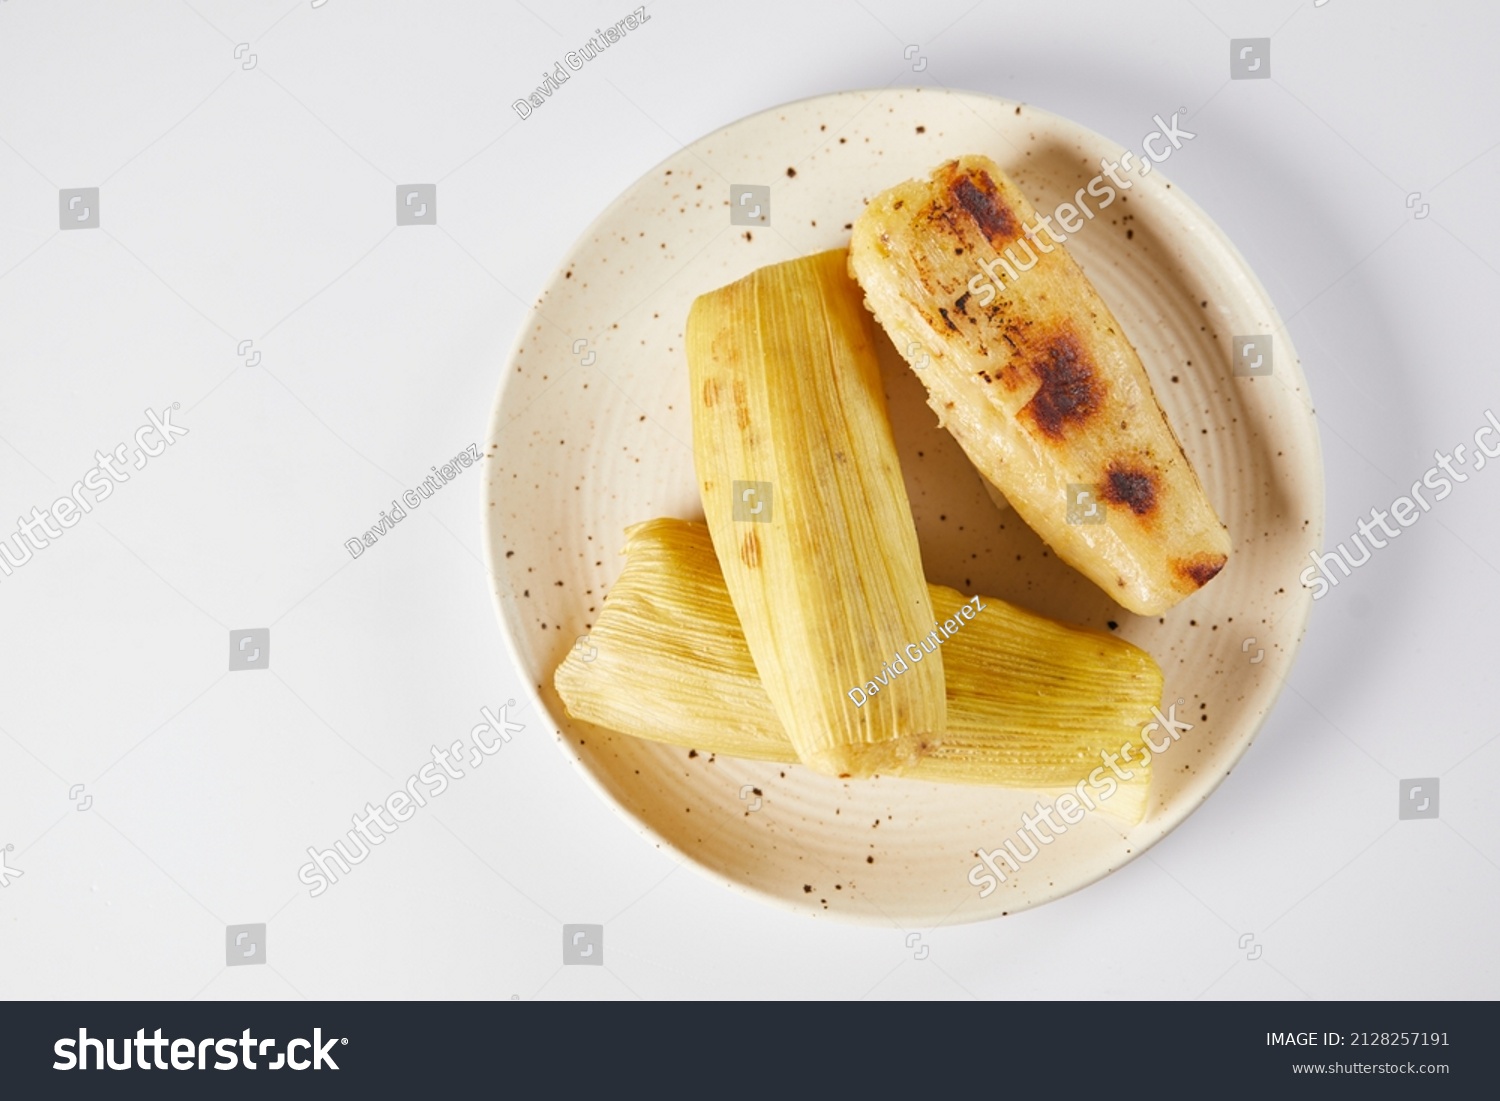 Humitas are savory steamed fresh corn cakes, a traditional Ecuadorian appetizer. On a white background.  #2128257191